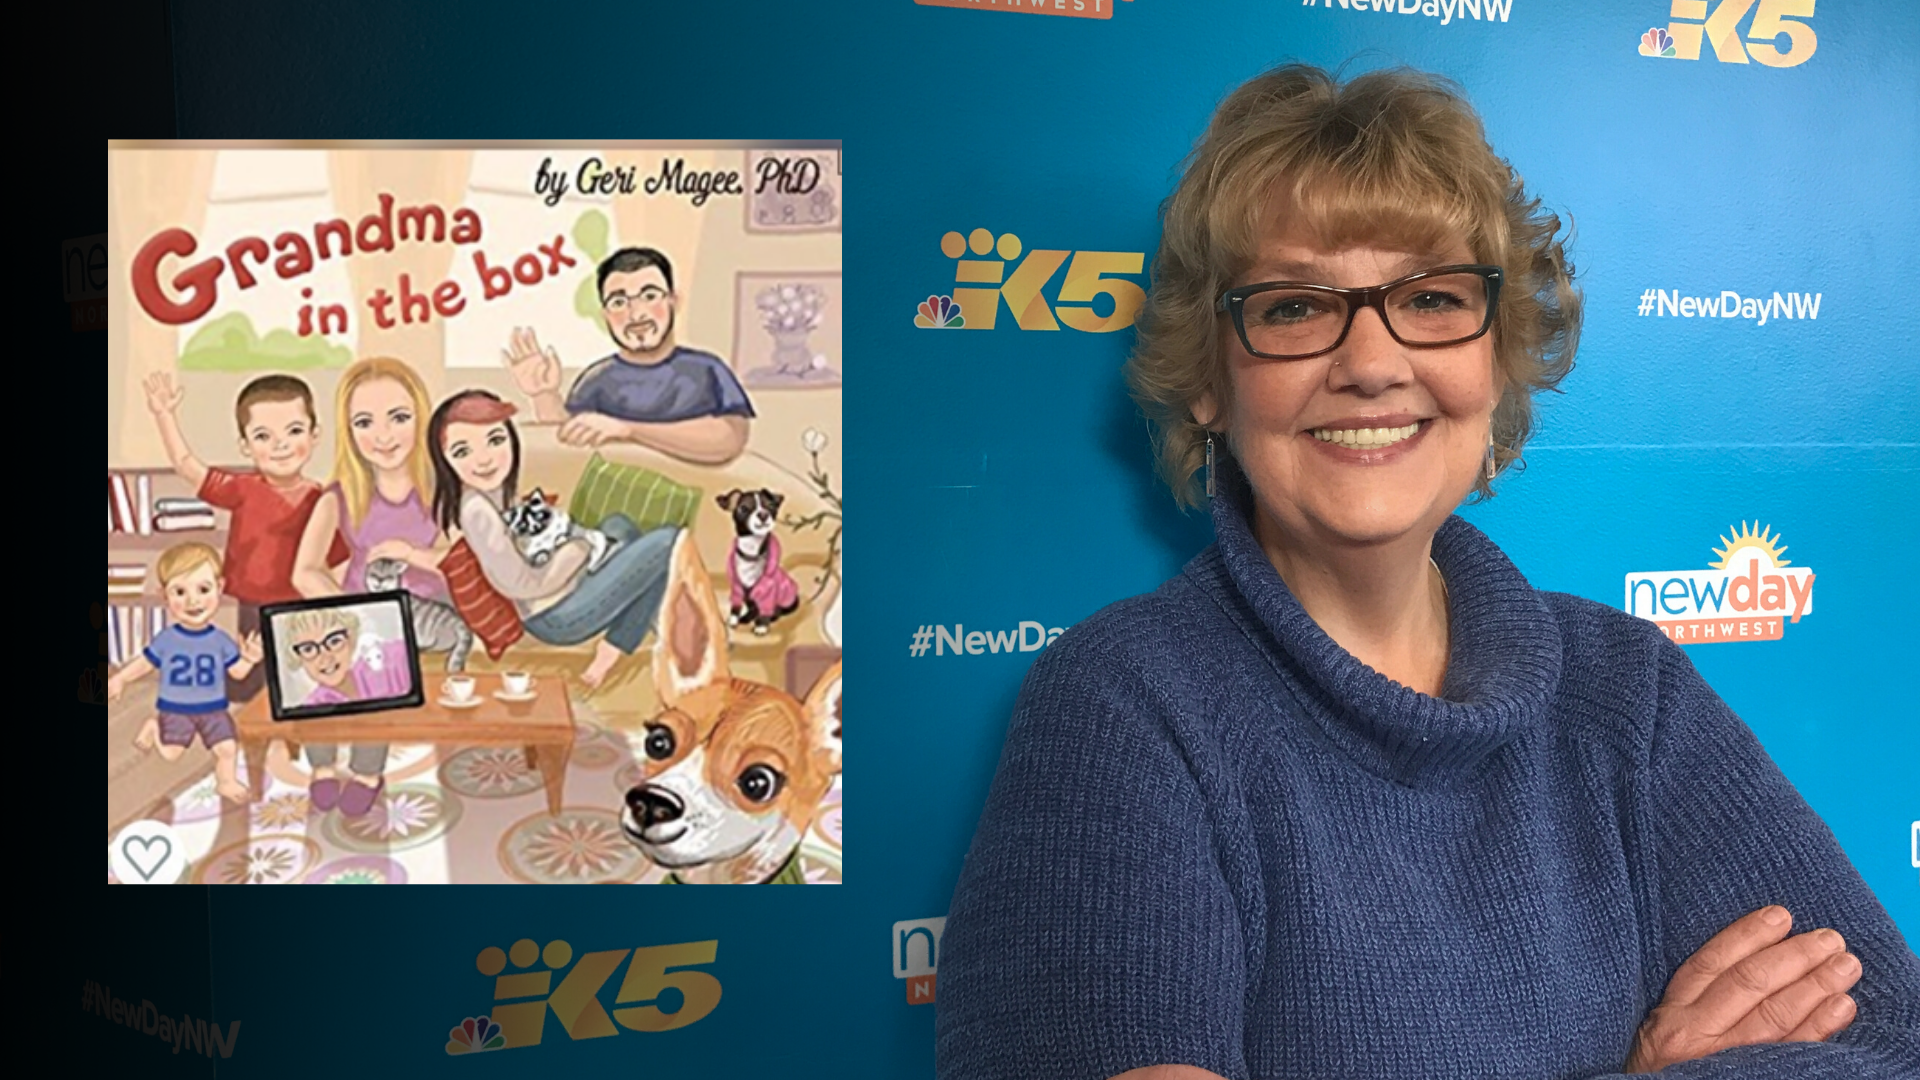 Geri Maggee's new book "Grandma in the Box" shares tips on how to stay connected with kids, grandkids and grandpets.